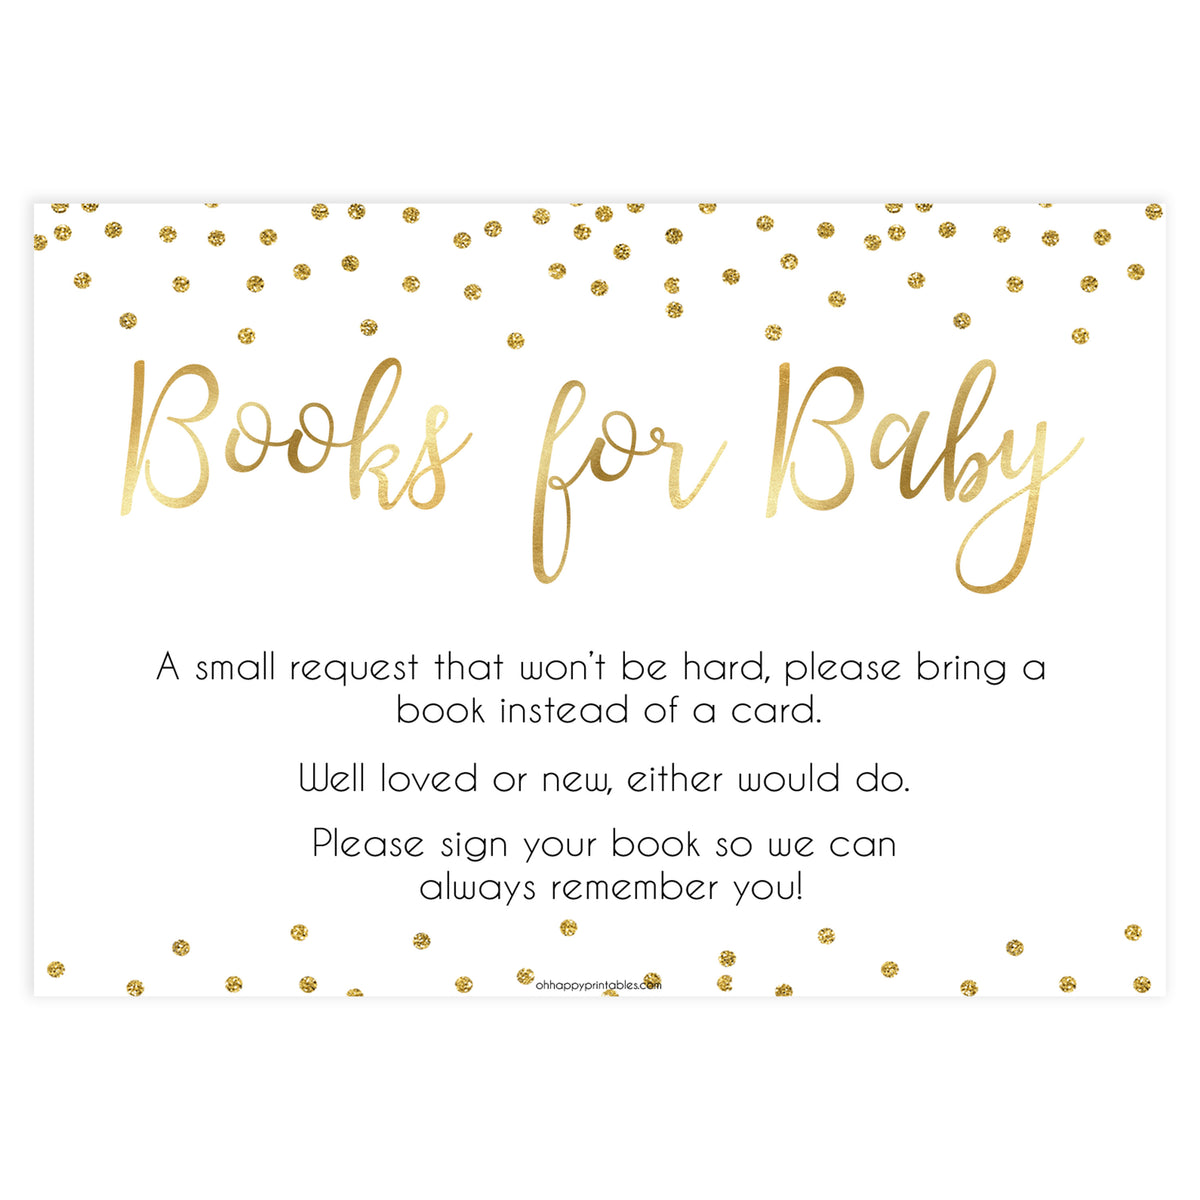 gold glitter baby games, printable baby games, books for baby, bring a book, fun baby games, baby shower keepsakes